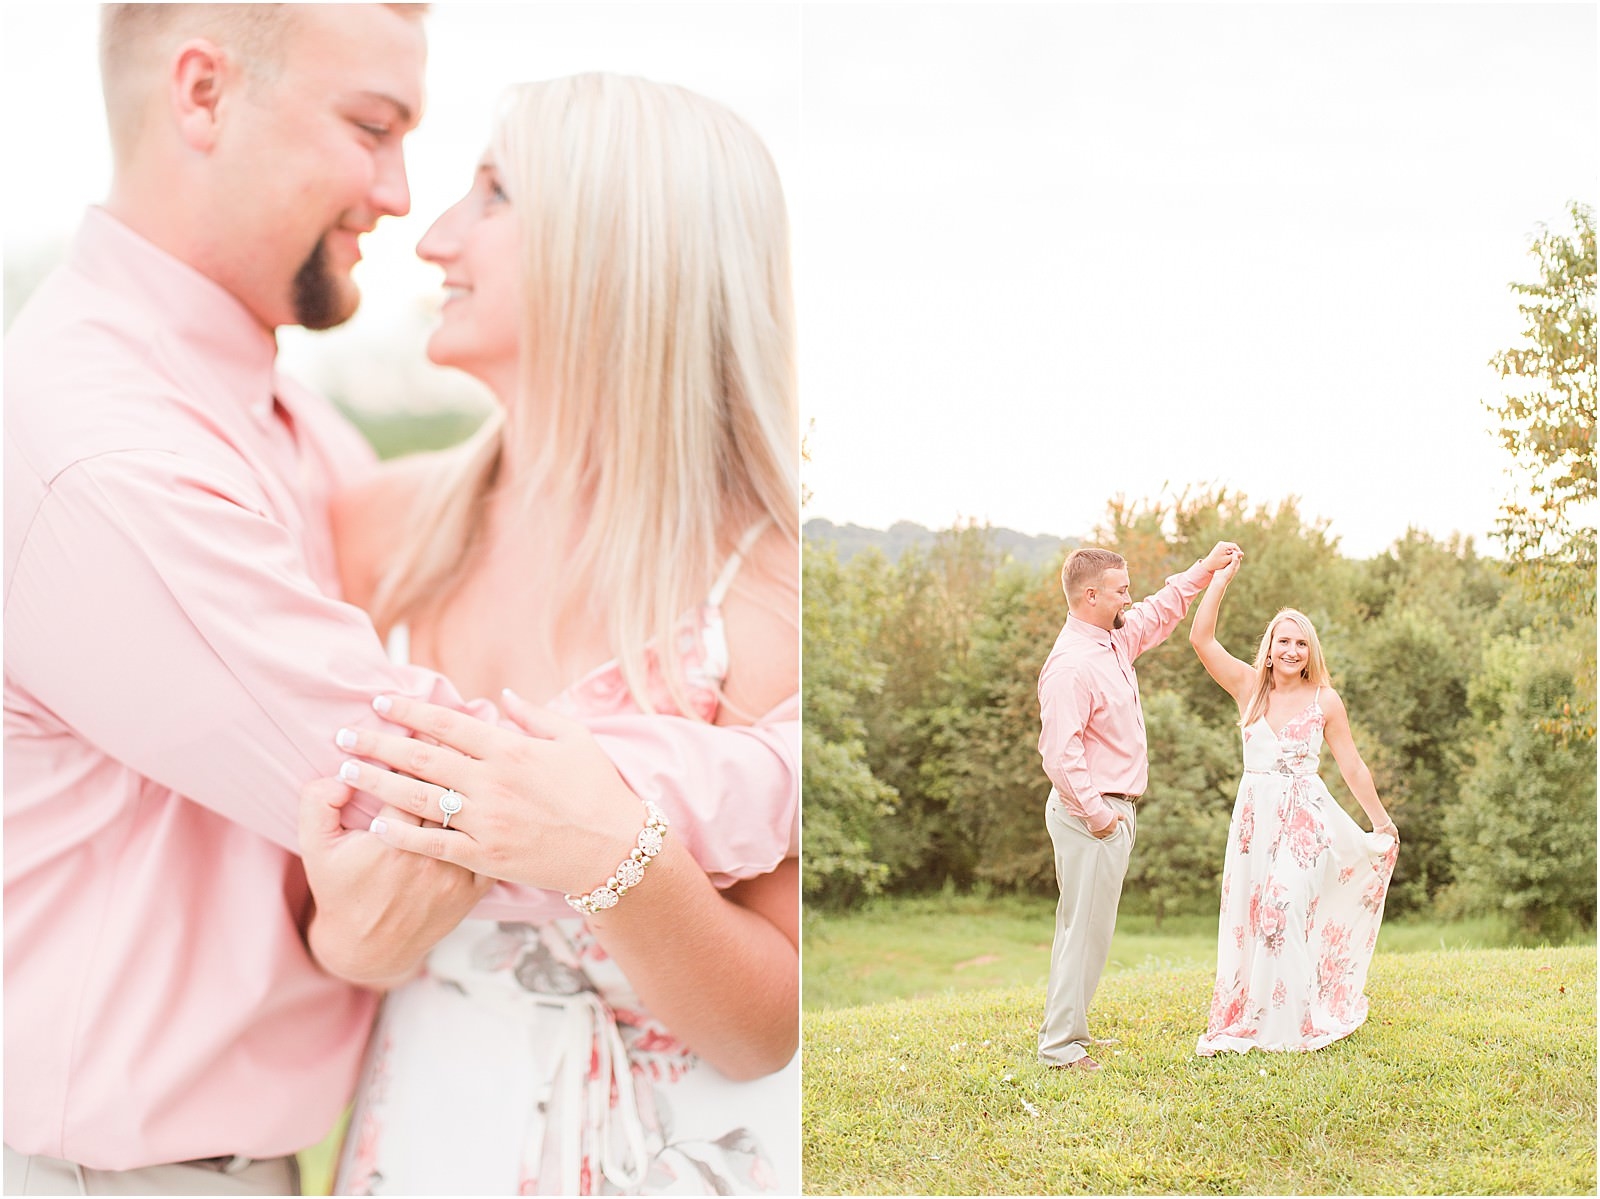 Lauren and Bryce | The Corner House B&ed and Breakfast Engagement Session | Bret and Brandie Photography 022.jpg